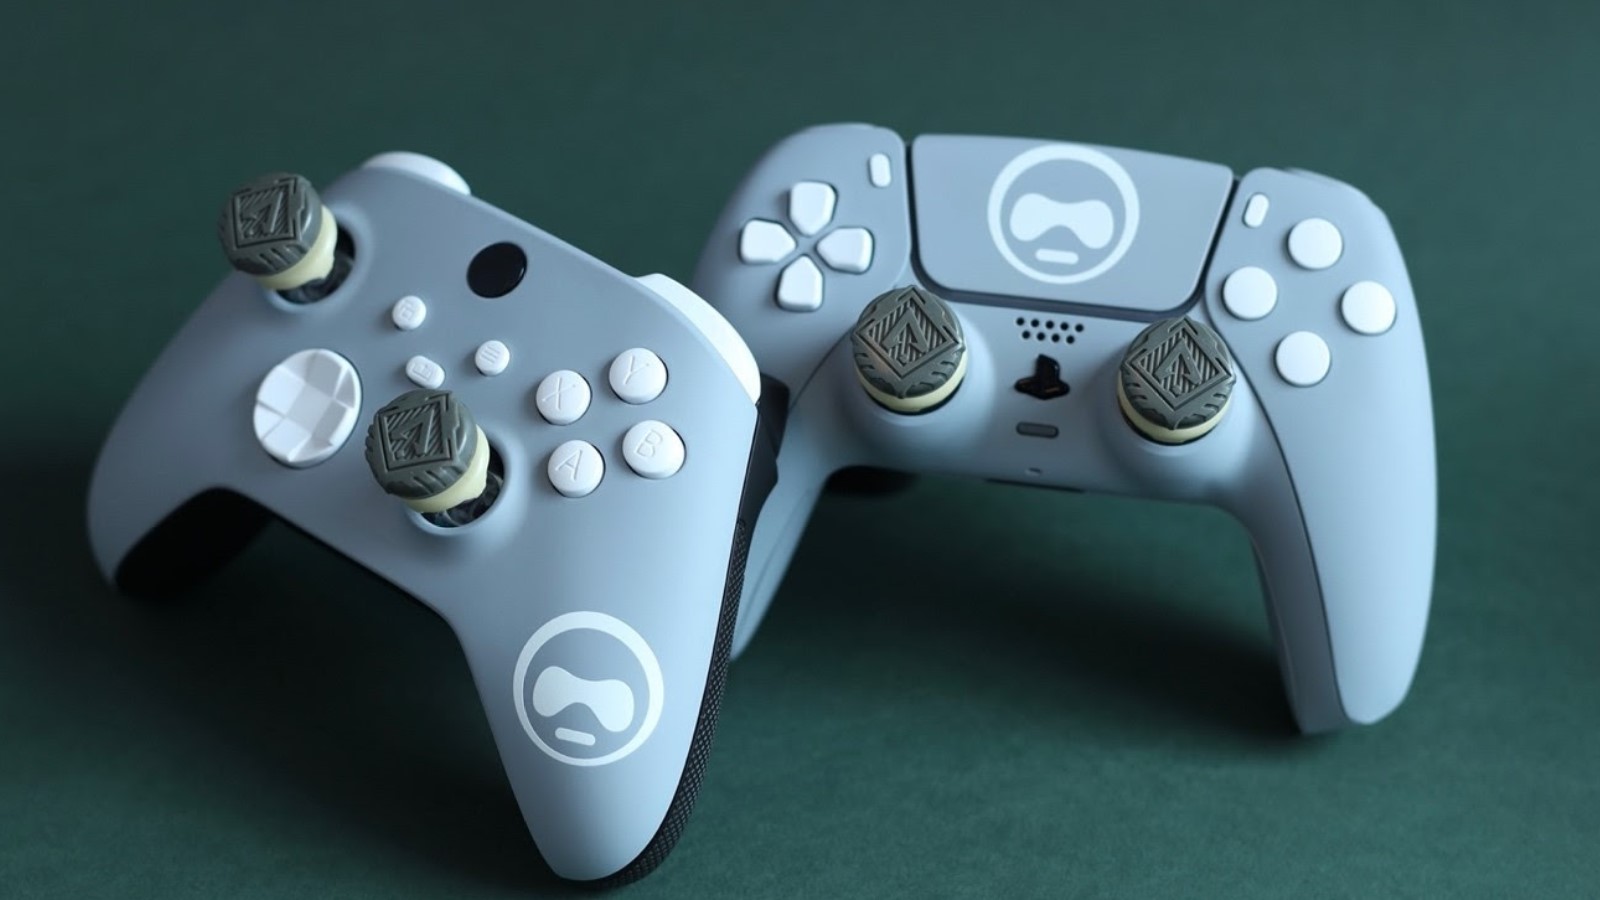 Limited-edition APEX Legends performance thumbsticks available now